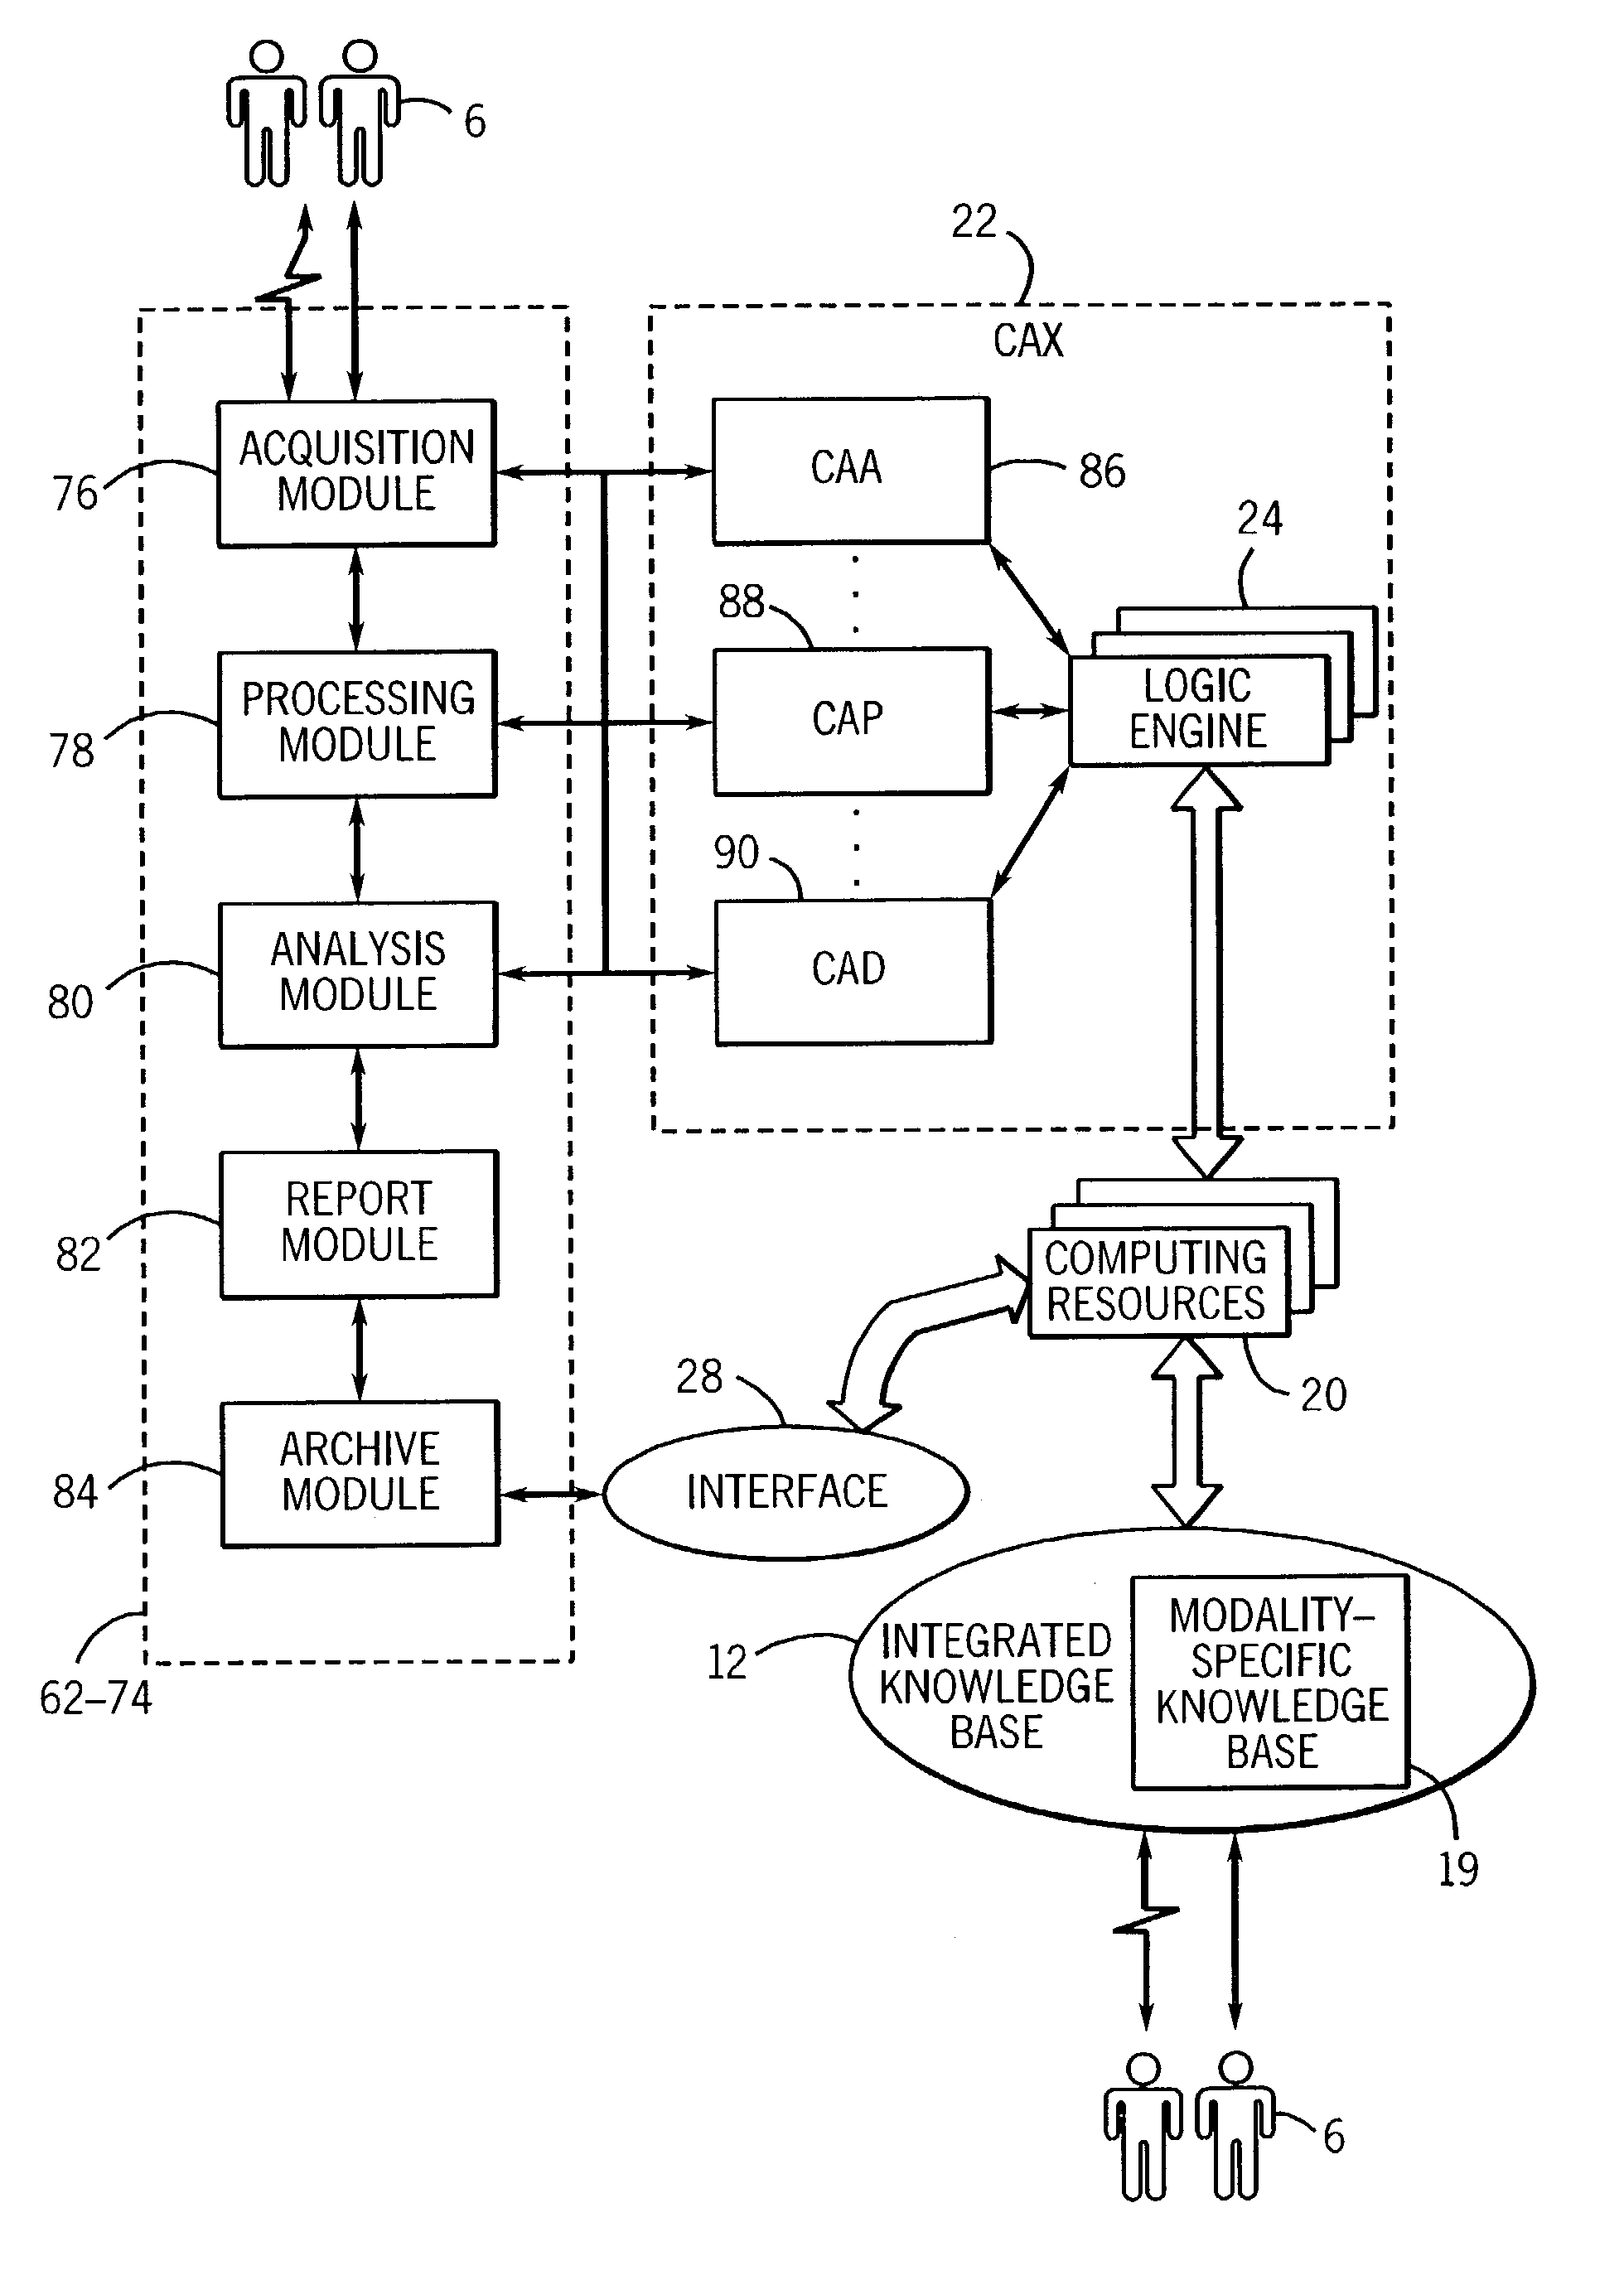 Computer-assisted data processing system and method incorporating automated learning